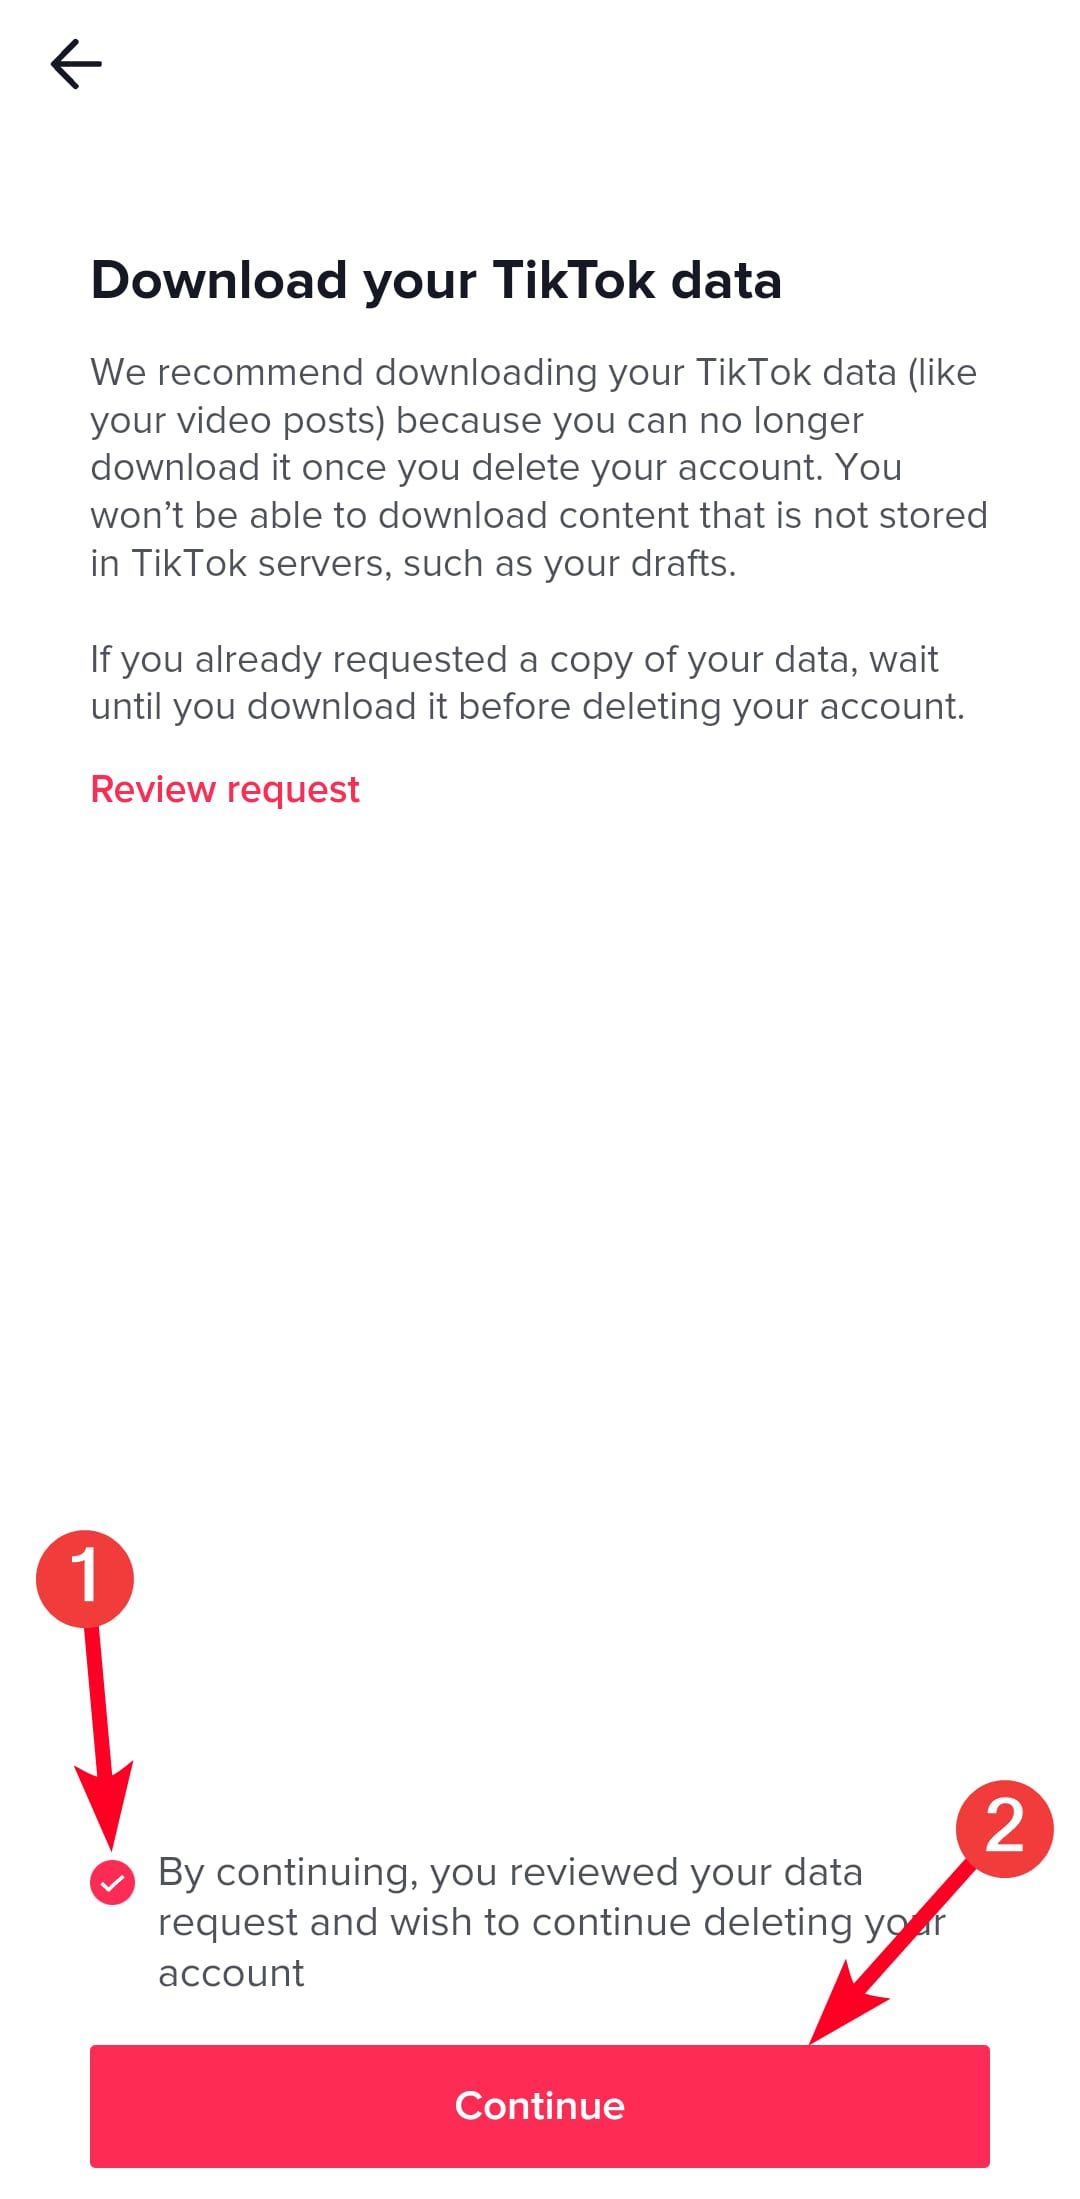 Review your data request before deleting your TikTok account